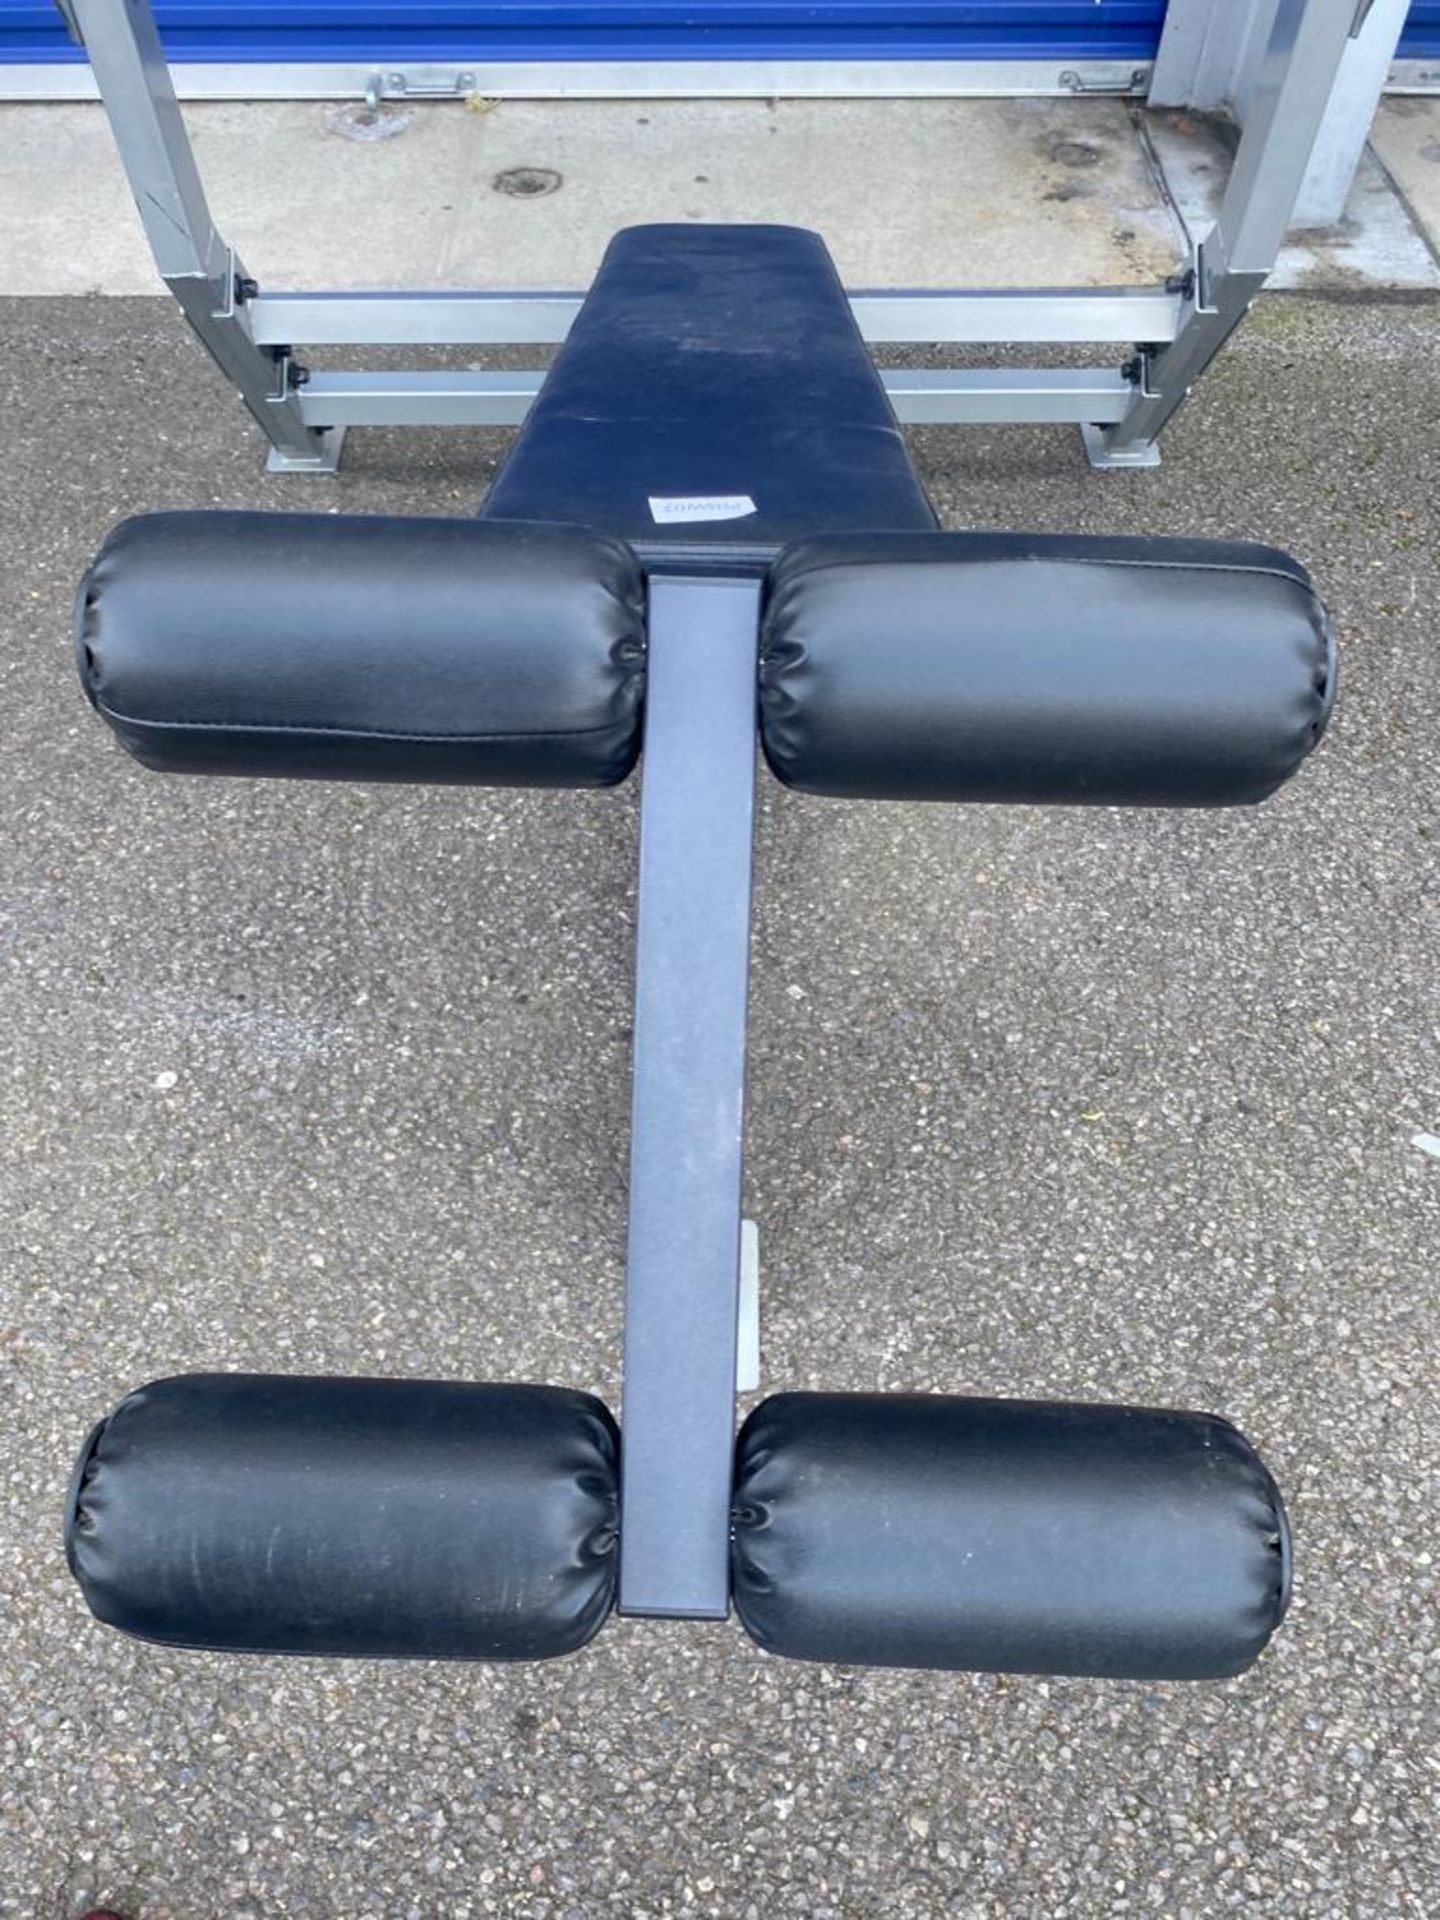 1 x Bodysolid Decline Exercise Bench With 3 Bar Positions - Dimensions (mm): 1900x1250x1300 - Image 3 of 4